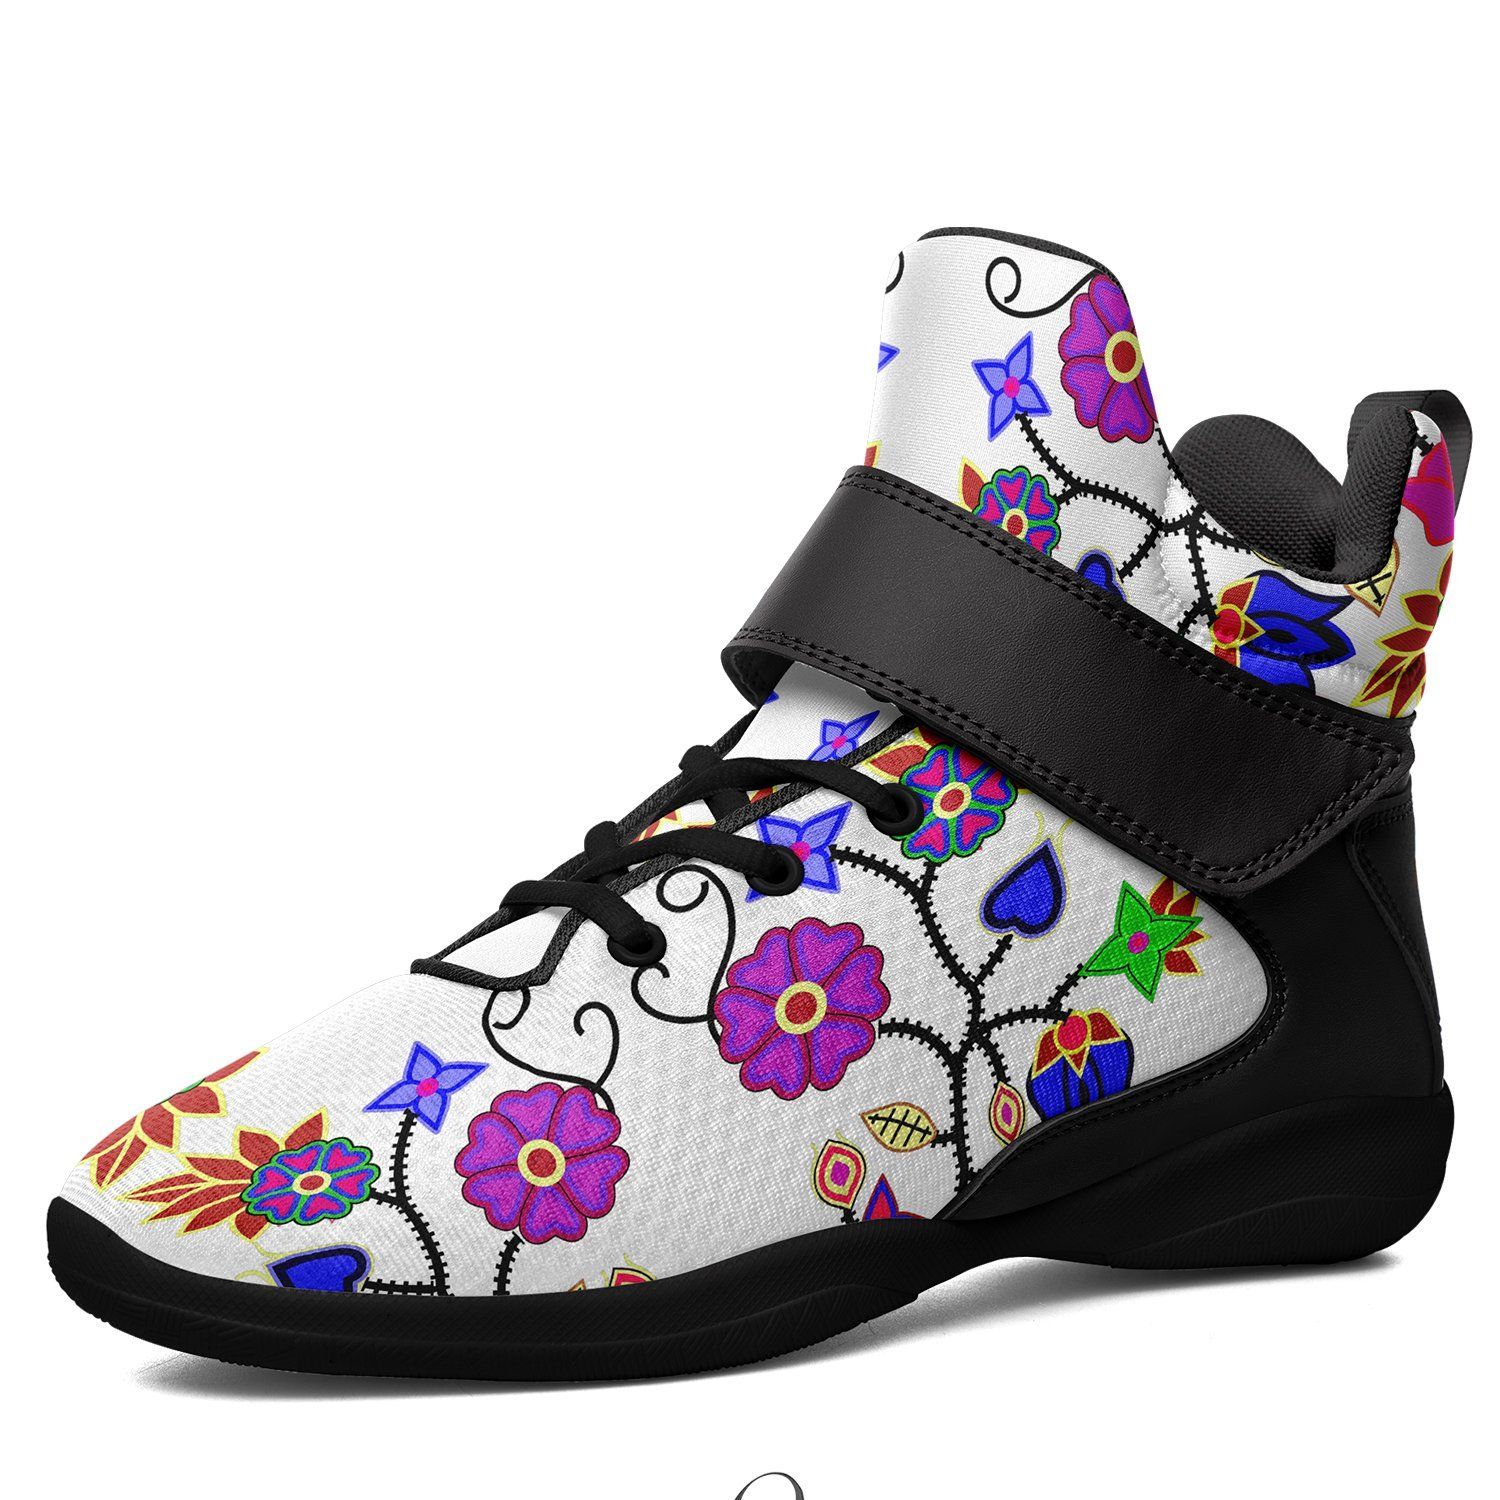 Floral Beadwork Seven Clans White Ipottaa Basketball / Sport High Top Shoes - Black Sole 49 Dzine 